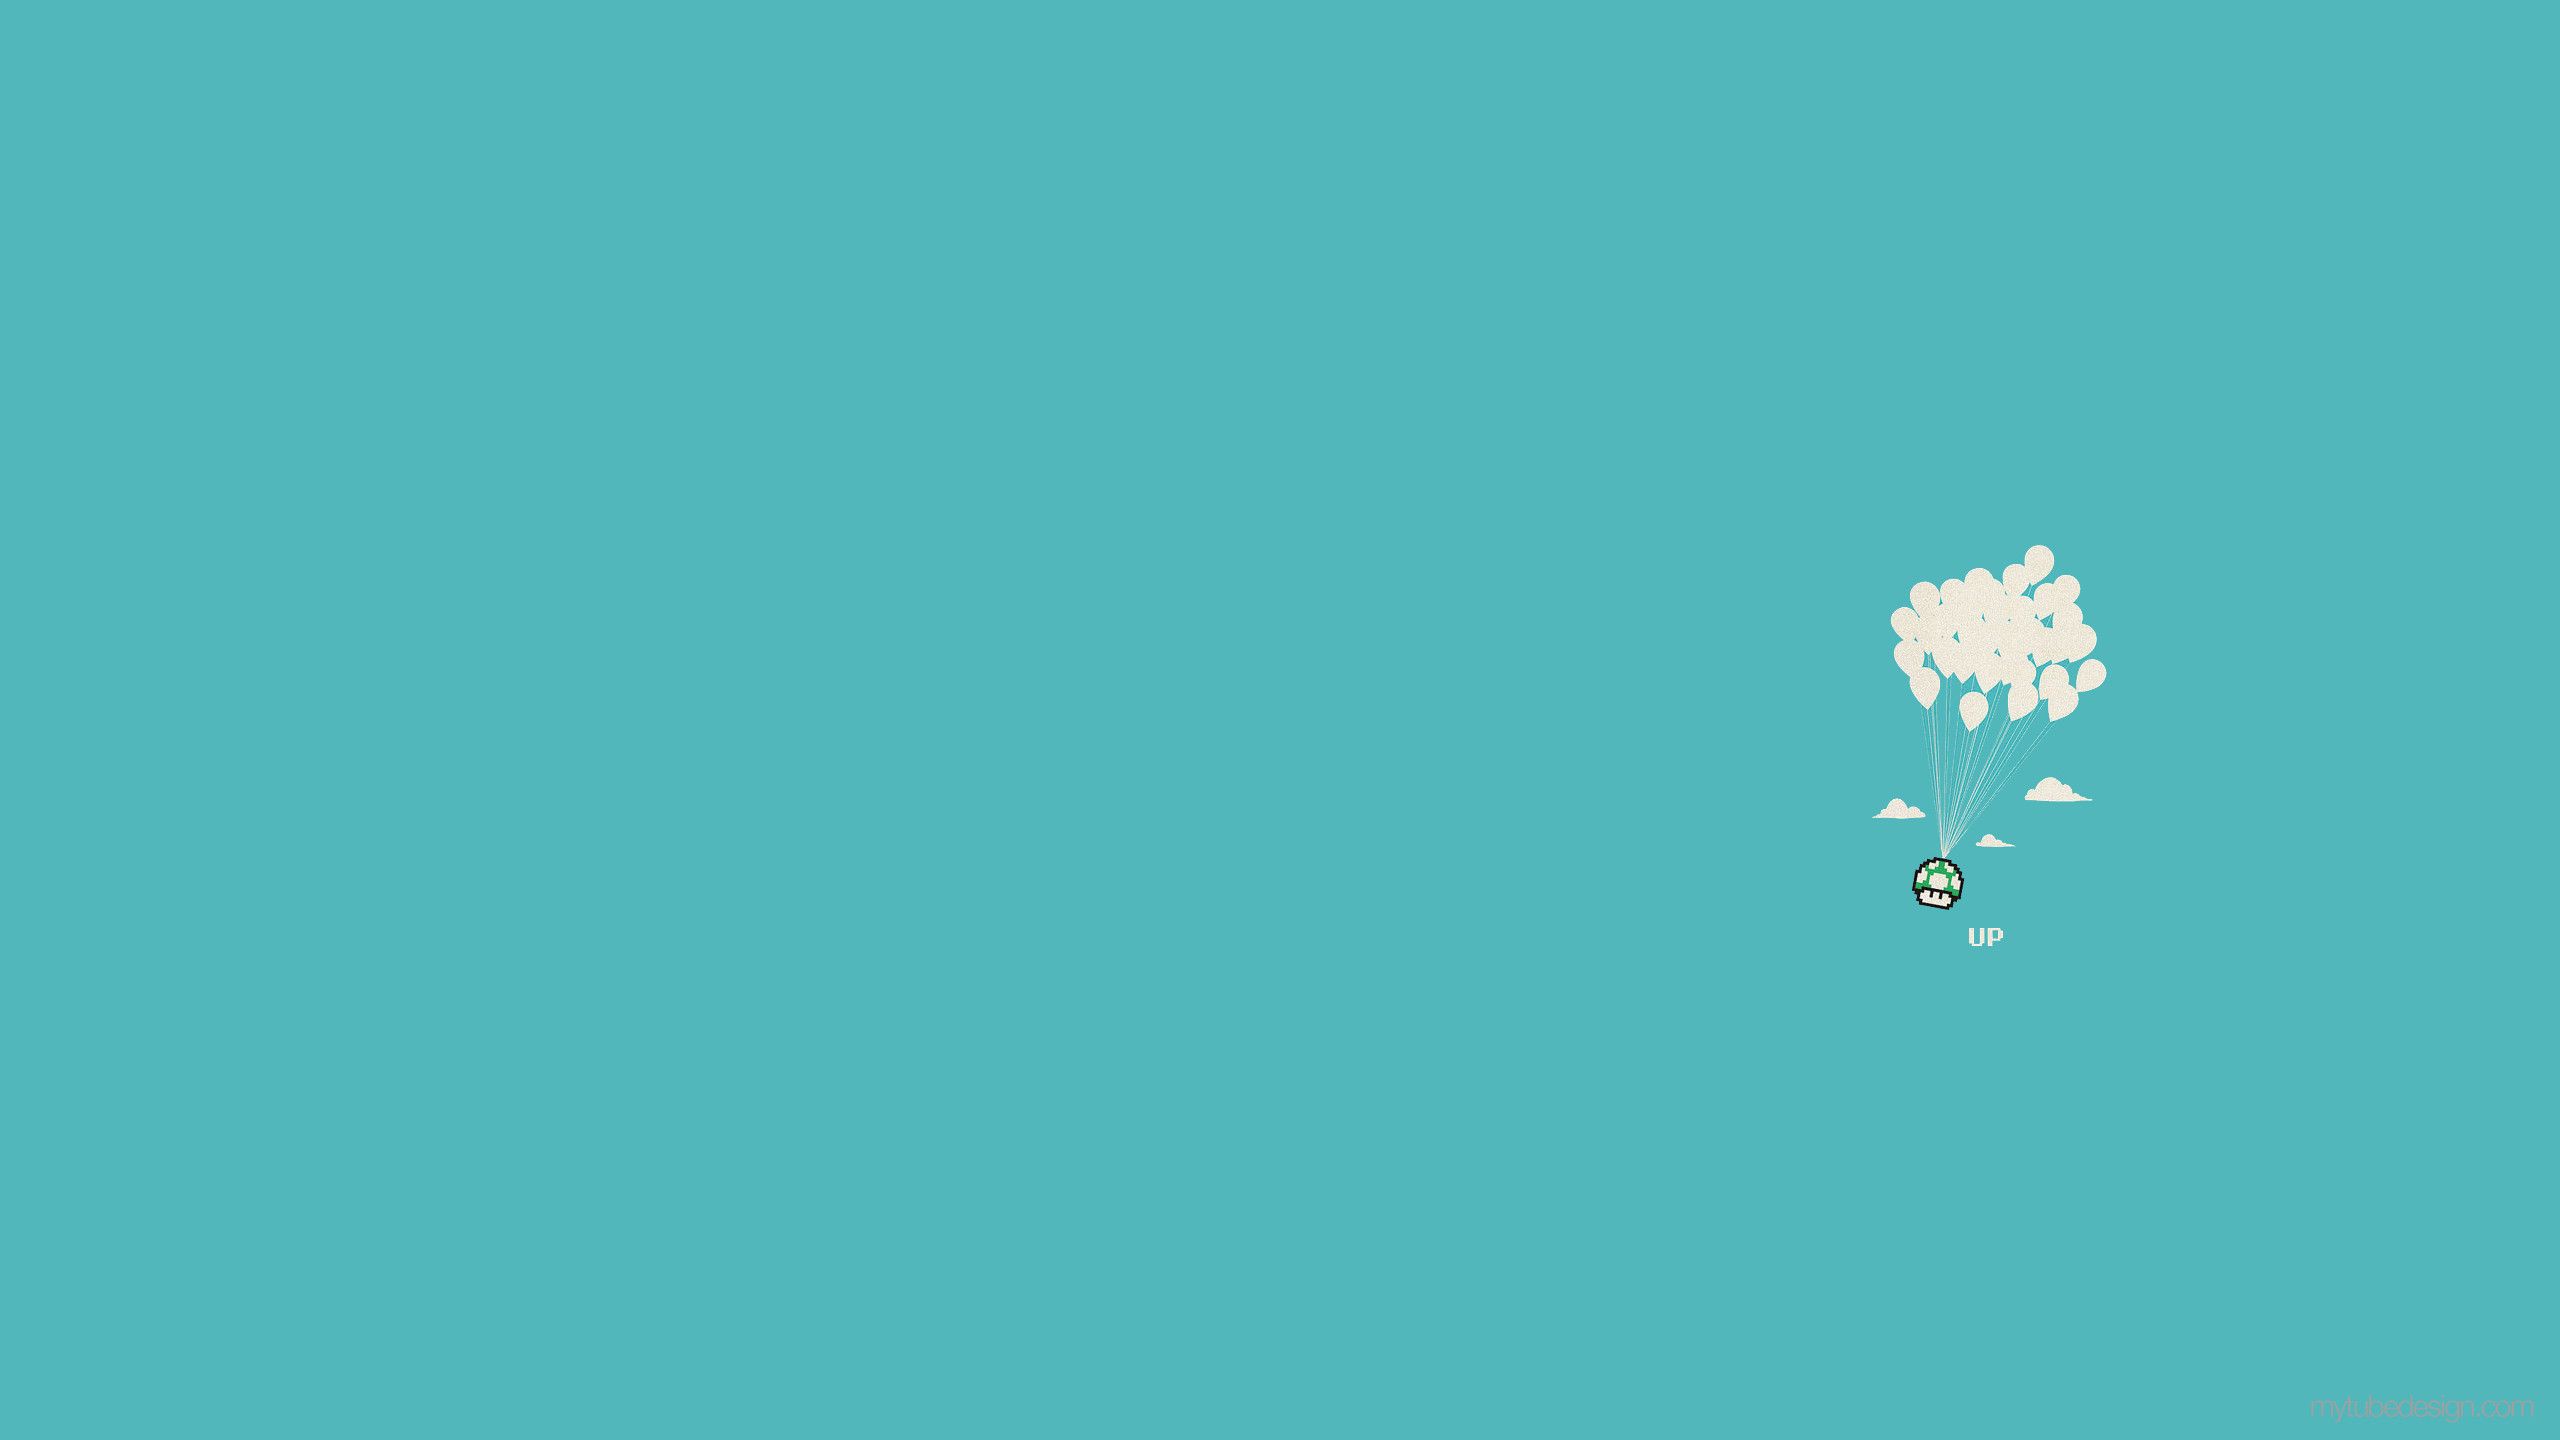 Minimalist desktop wallpaper with a clock flying on a hot air balloon - YouTube